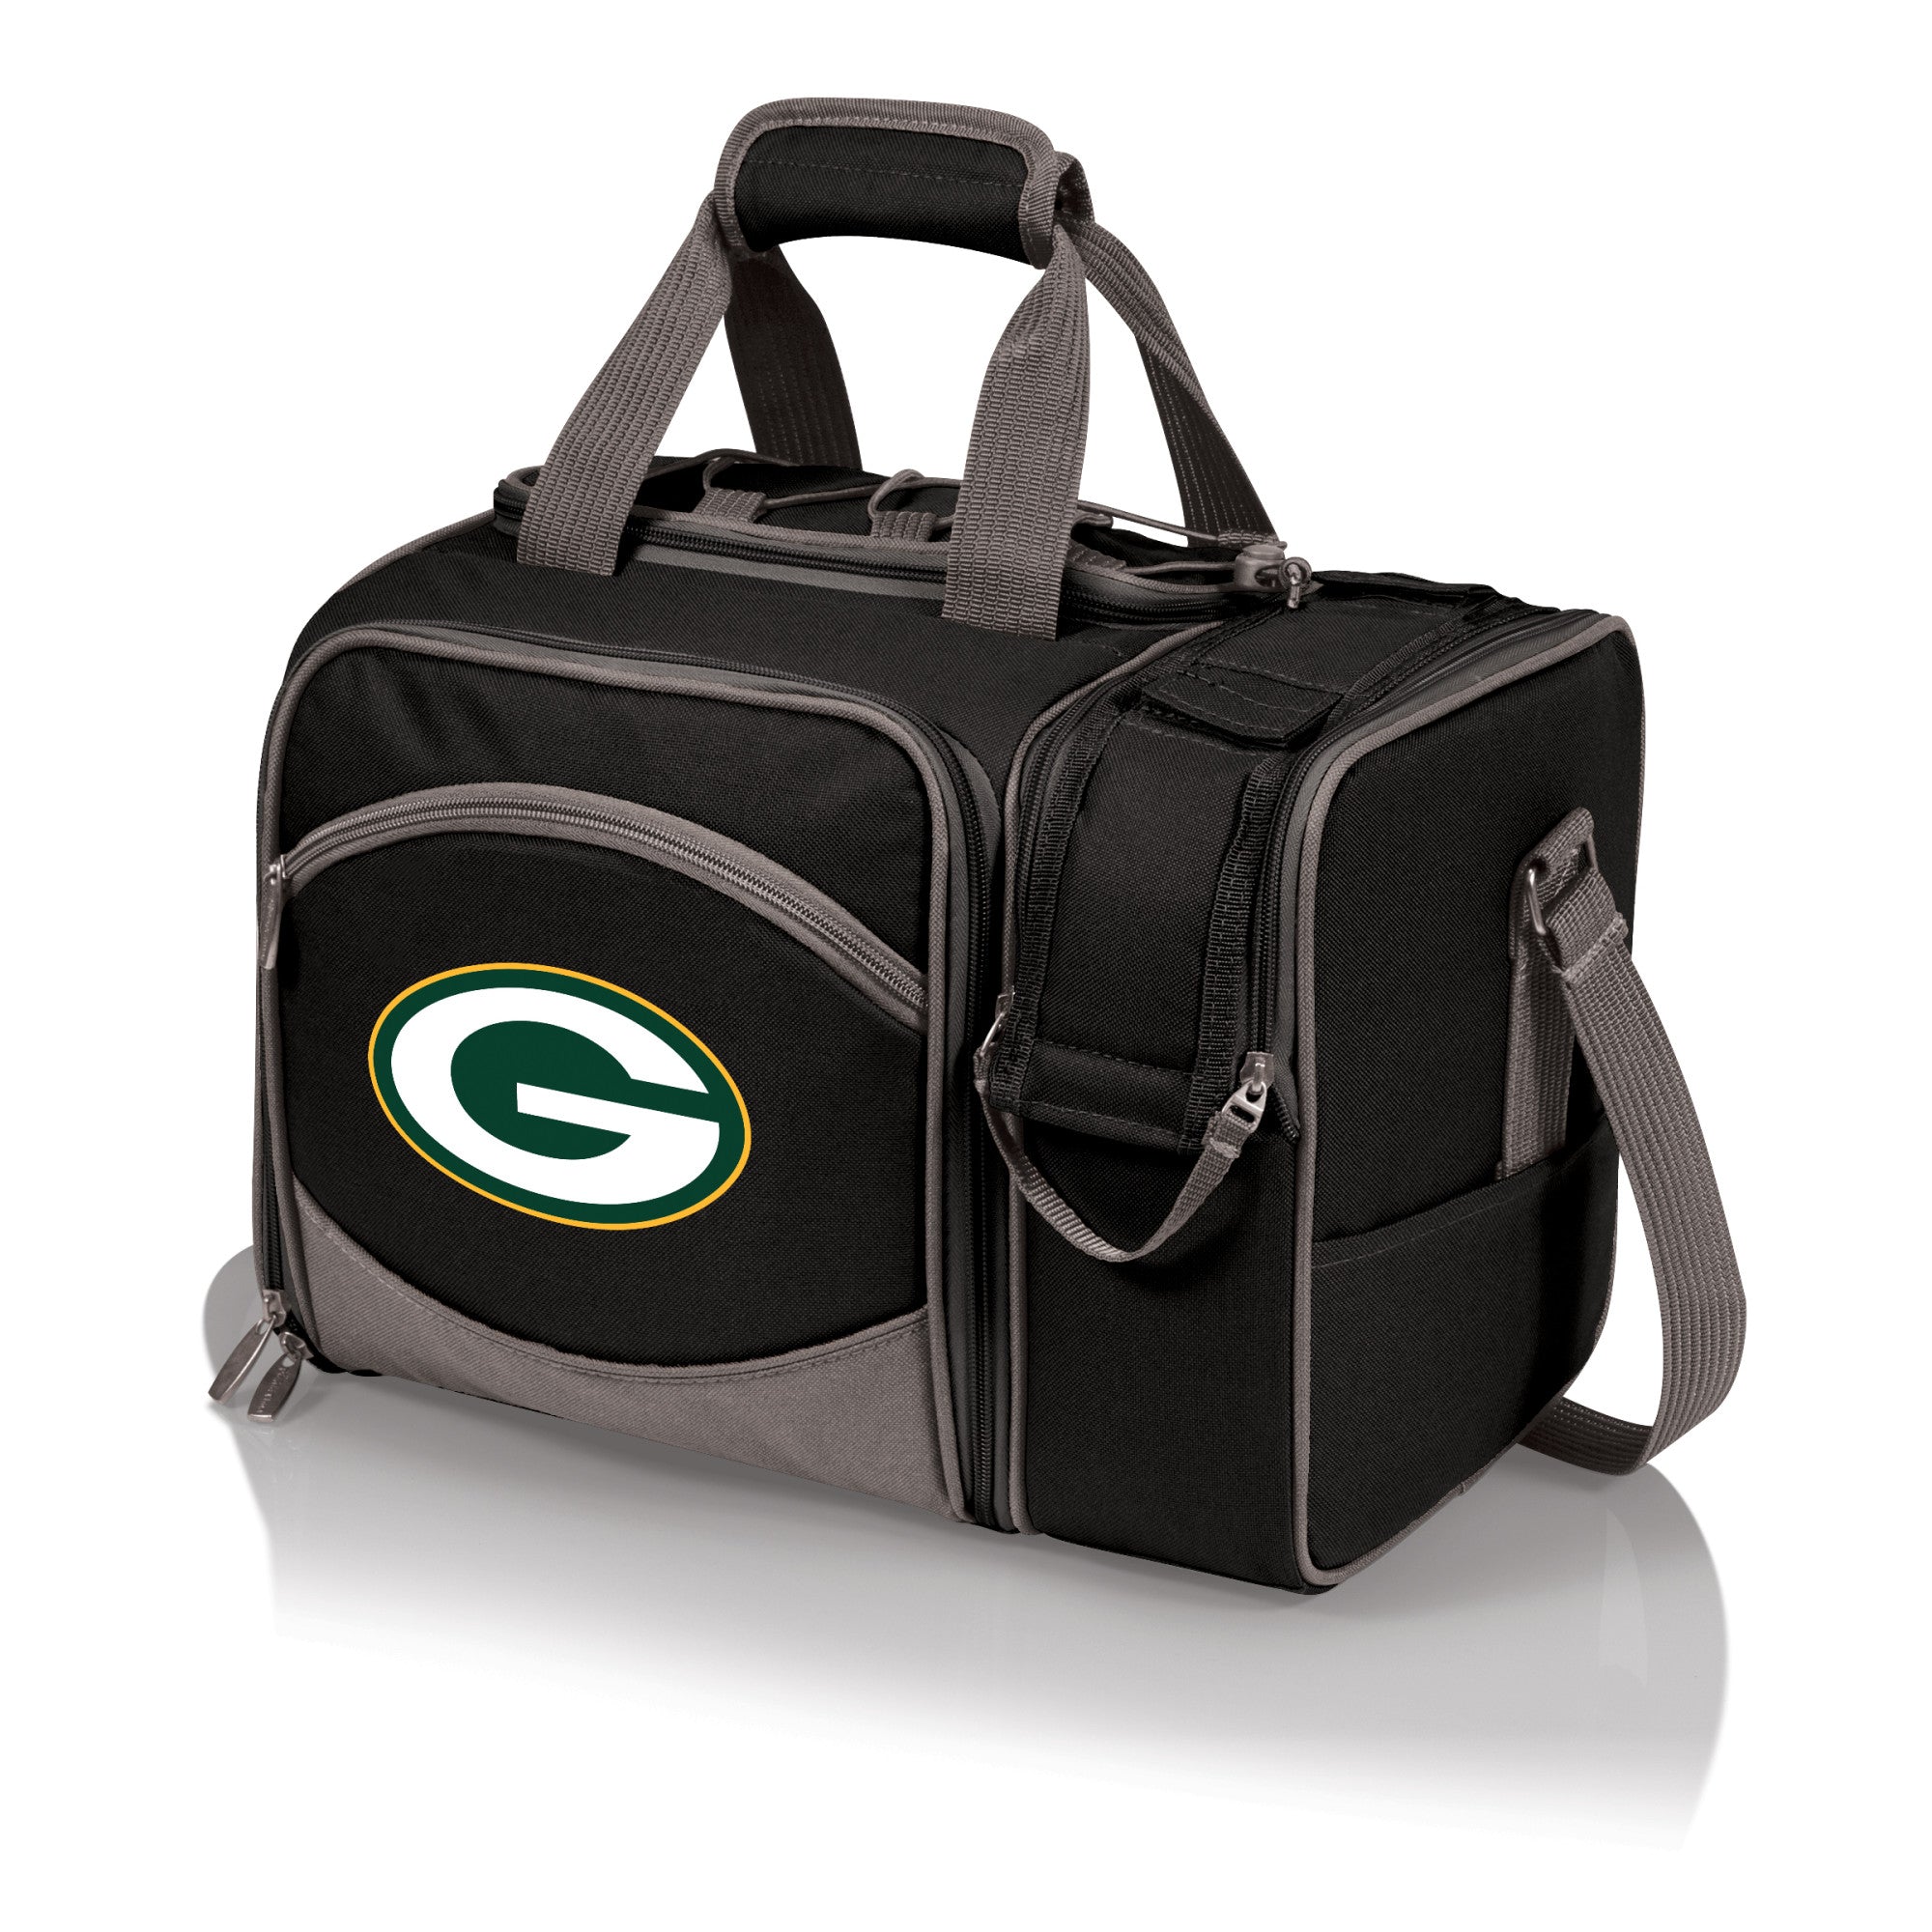 Green Bay Packers - Malibu Picnic Basket Cooler, (Black with Gray Accents)